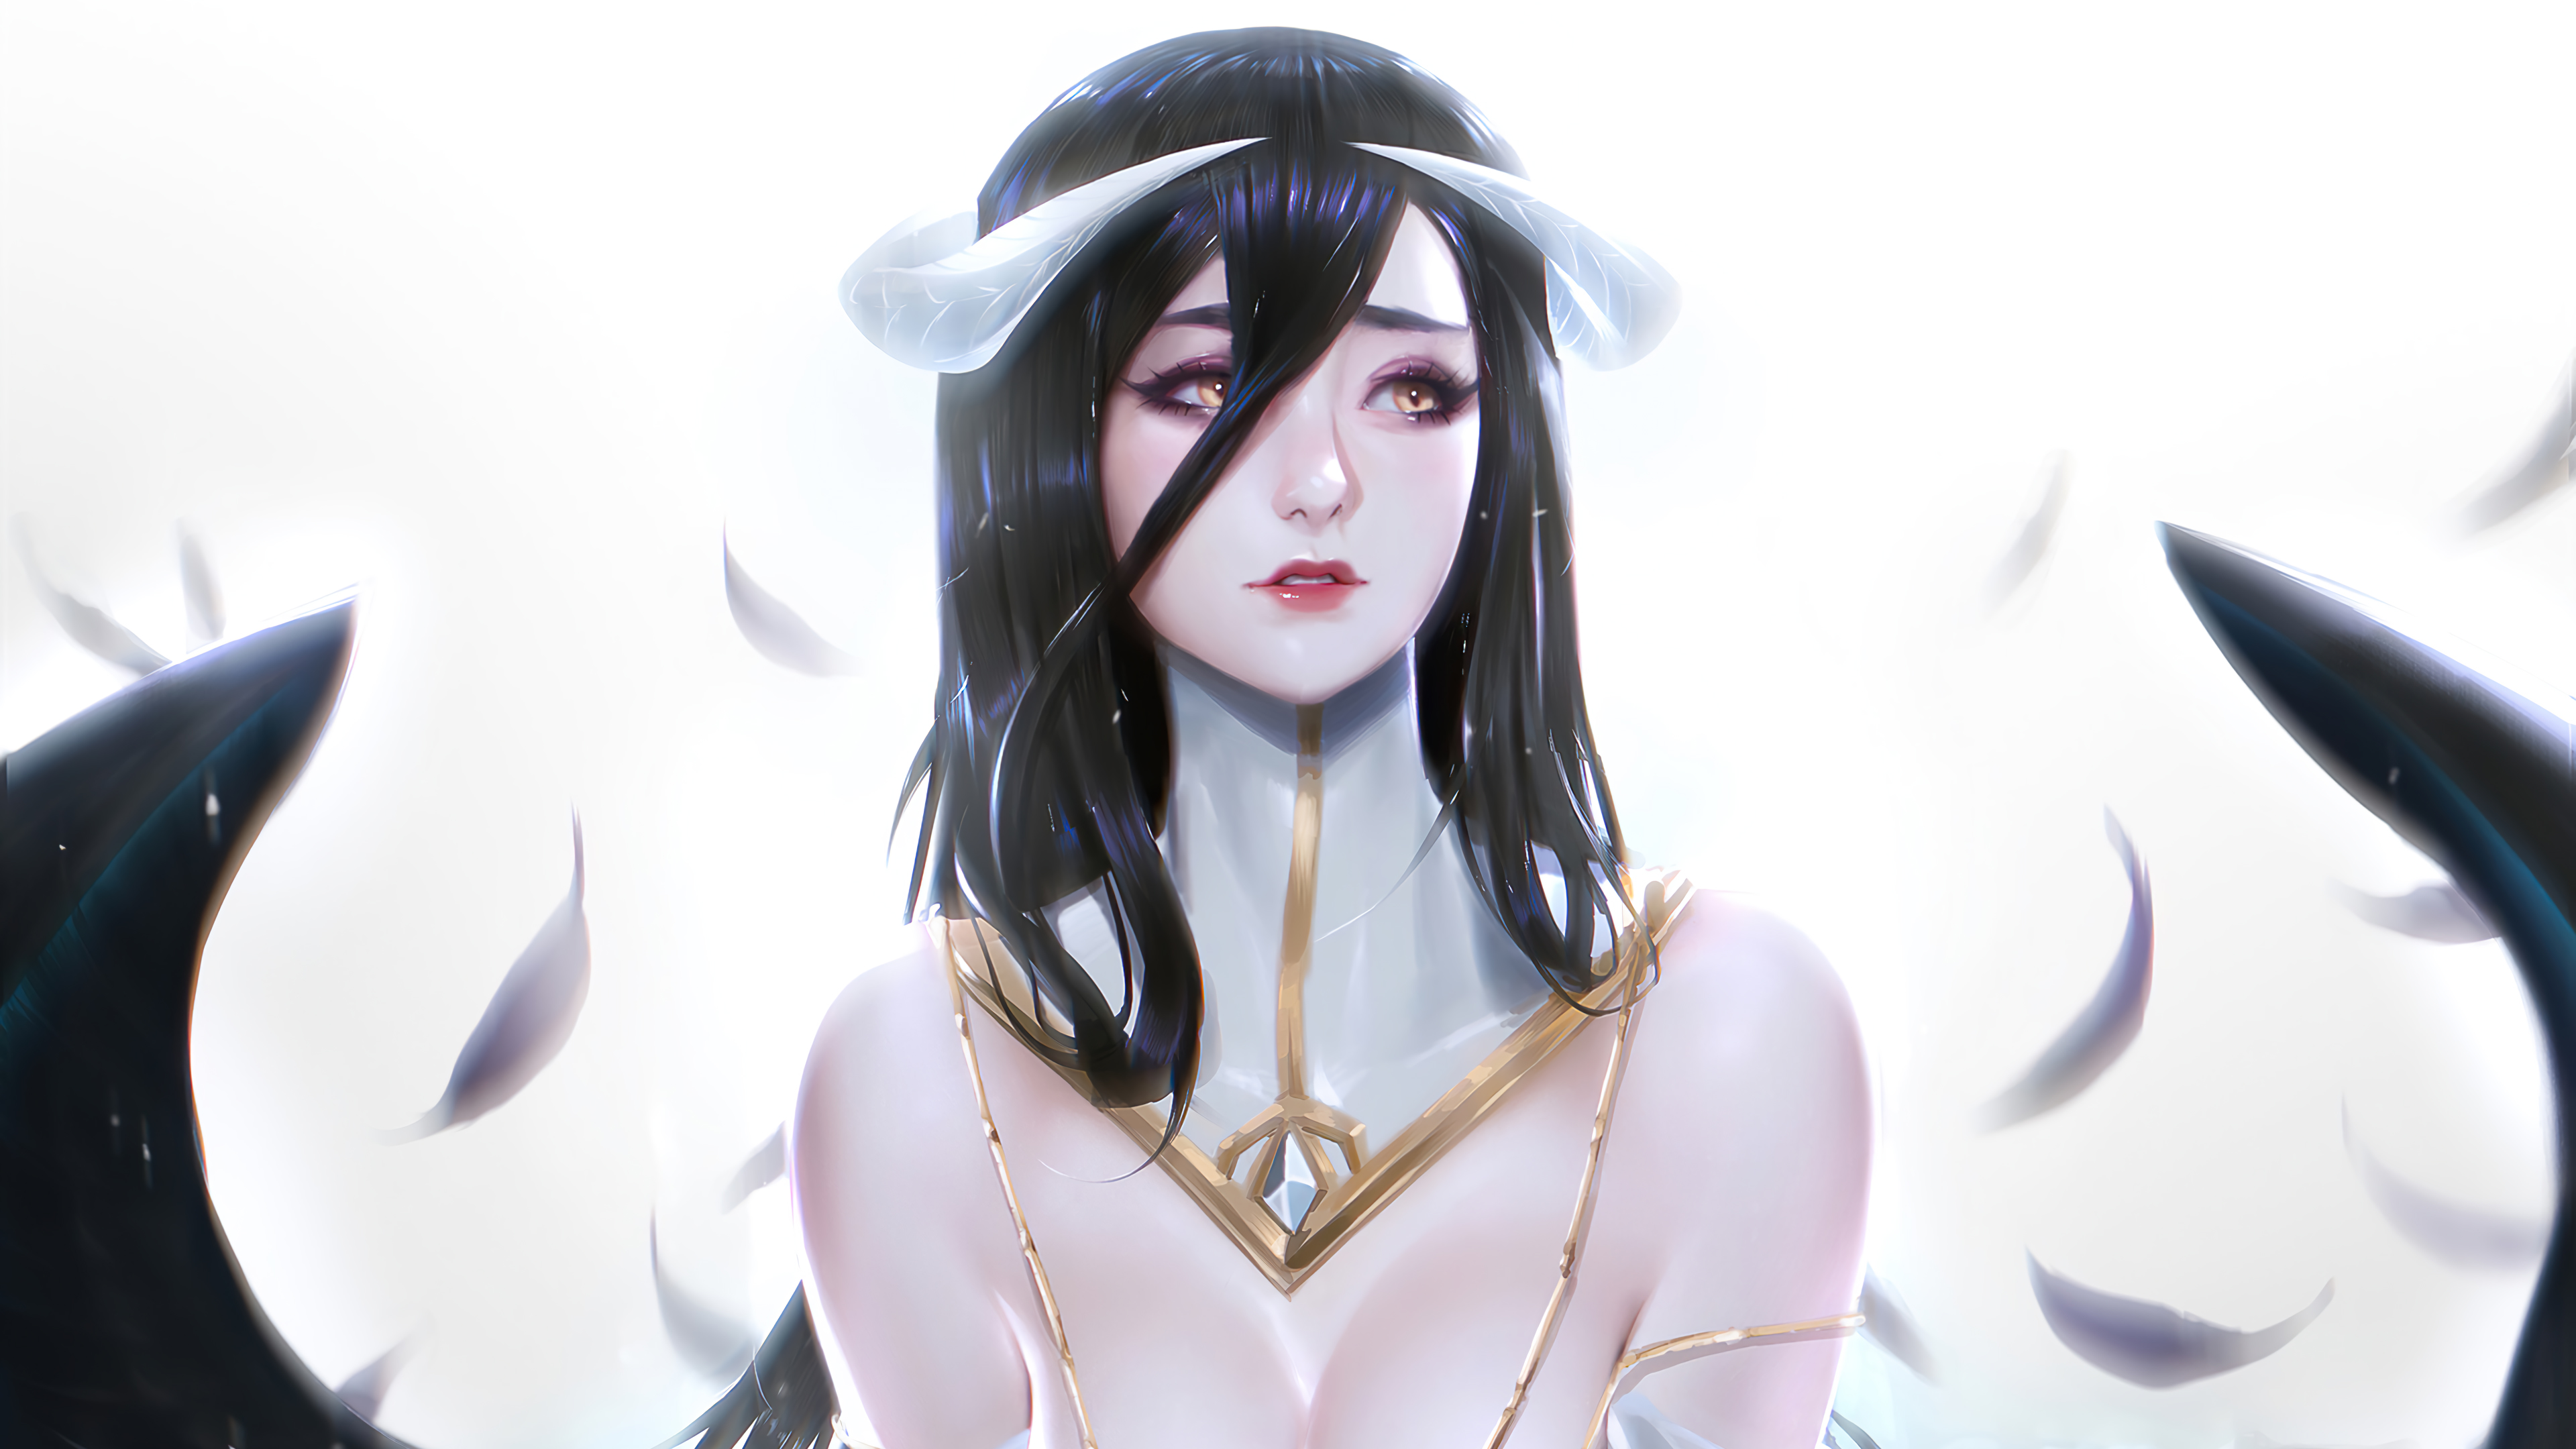 Overlord Anime Albedo OverLord Anime Girls Feathers Horns Wings 3840x2160